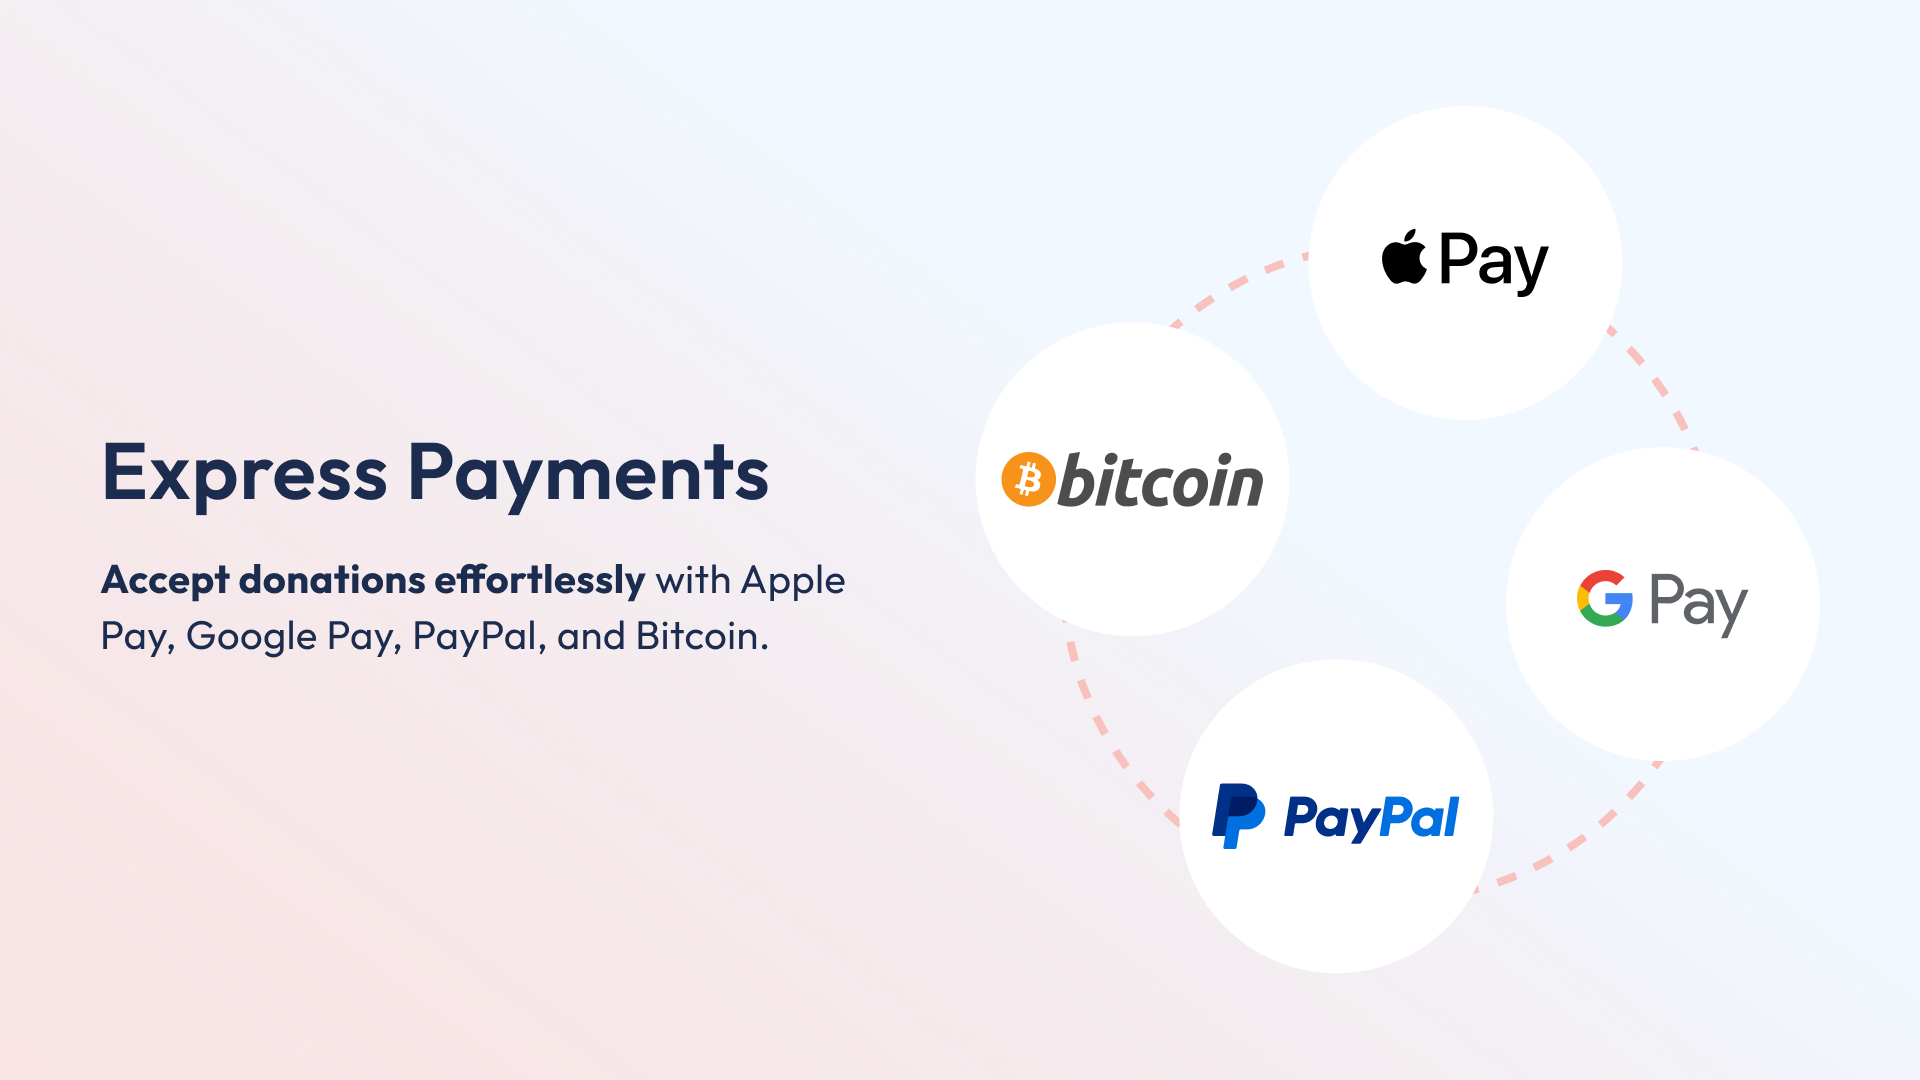 Accept donations effortlessly with Apple Pay, Google Pay, PayPal, and Bitcoin.